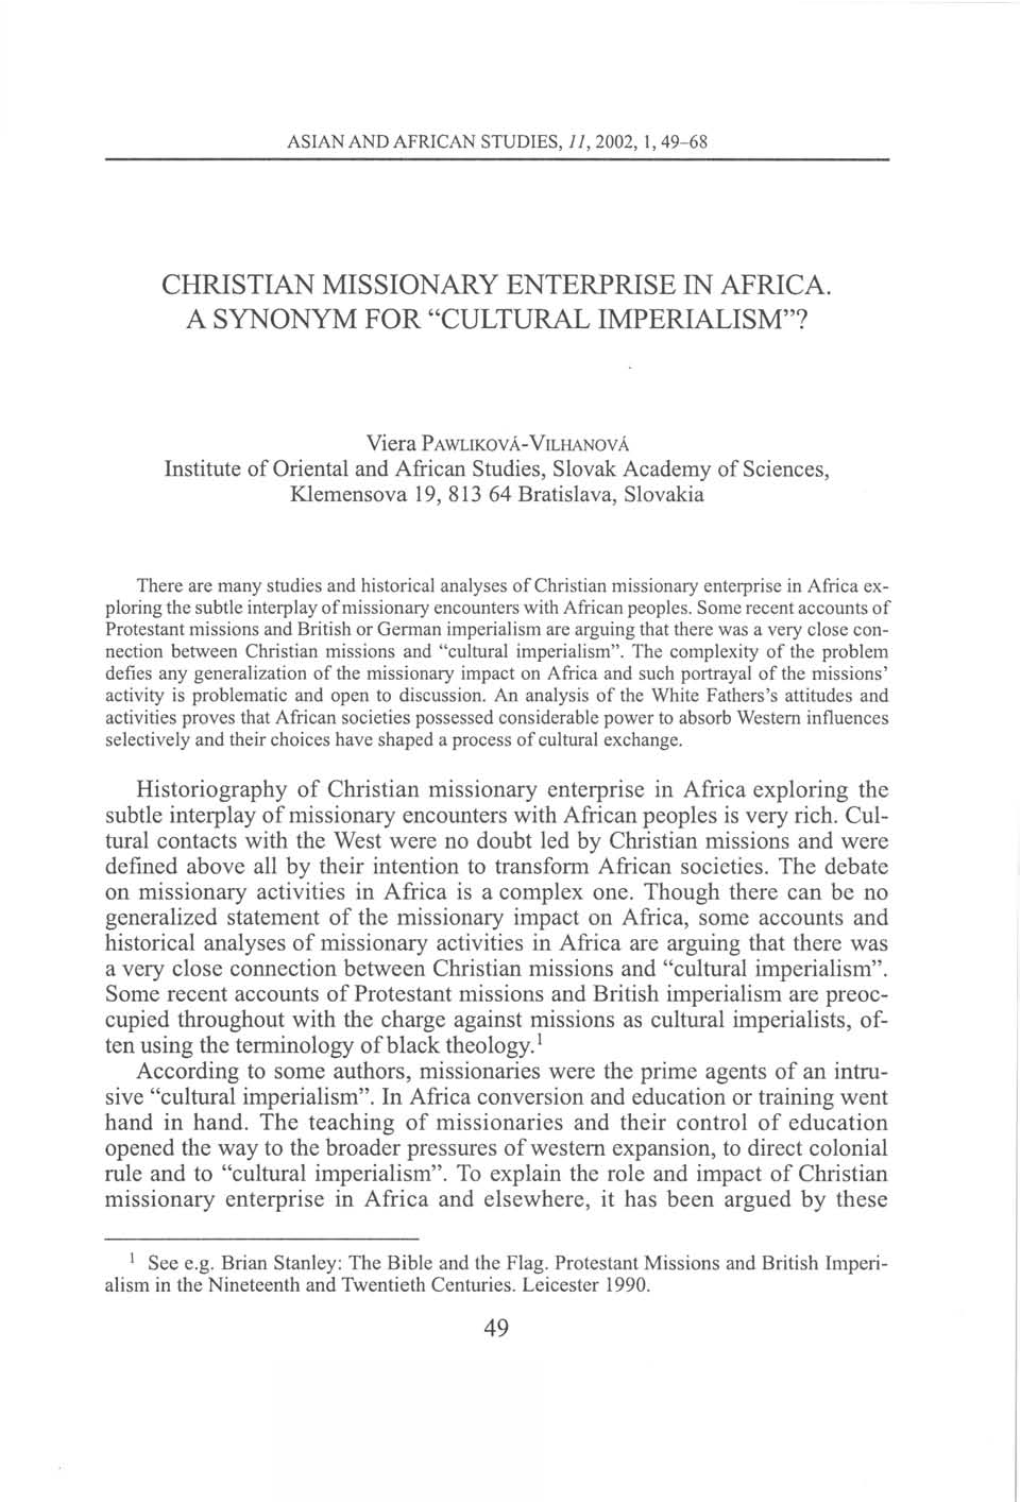 Christian Missionary Enterprise in Africa. a Synonym for “Cultural Imperialism’5?